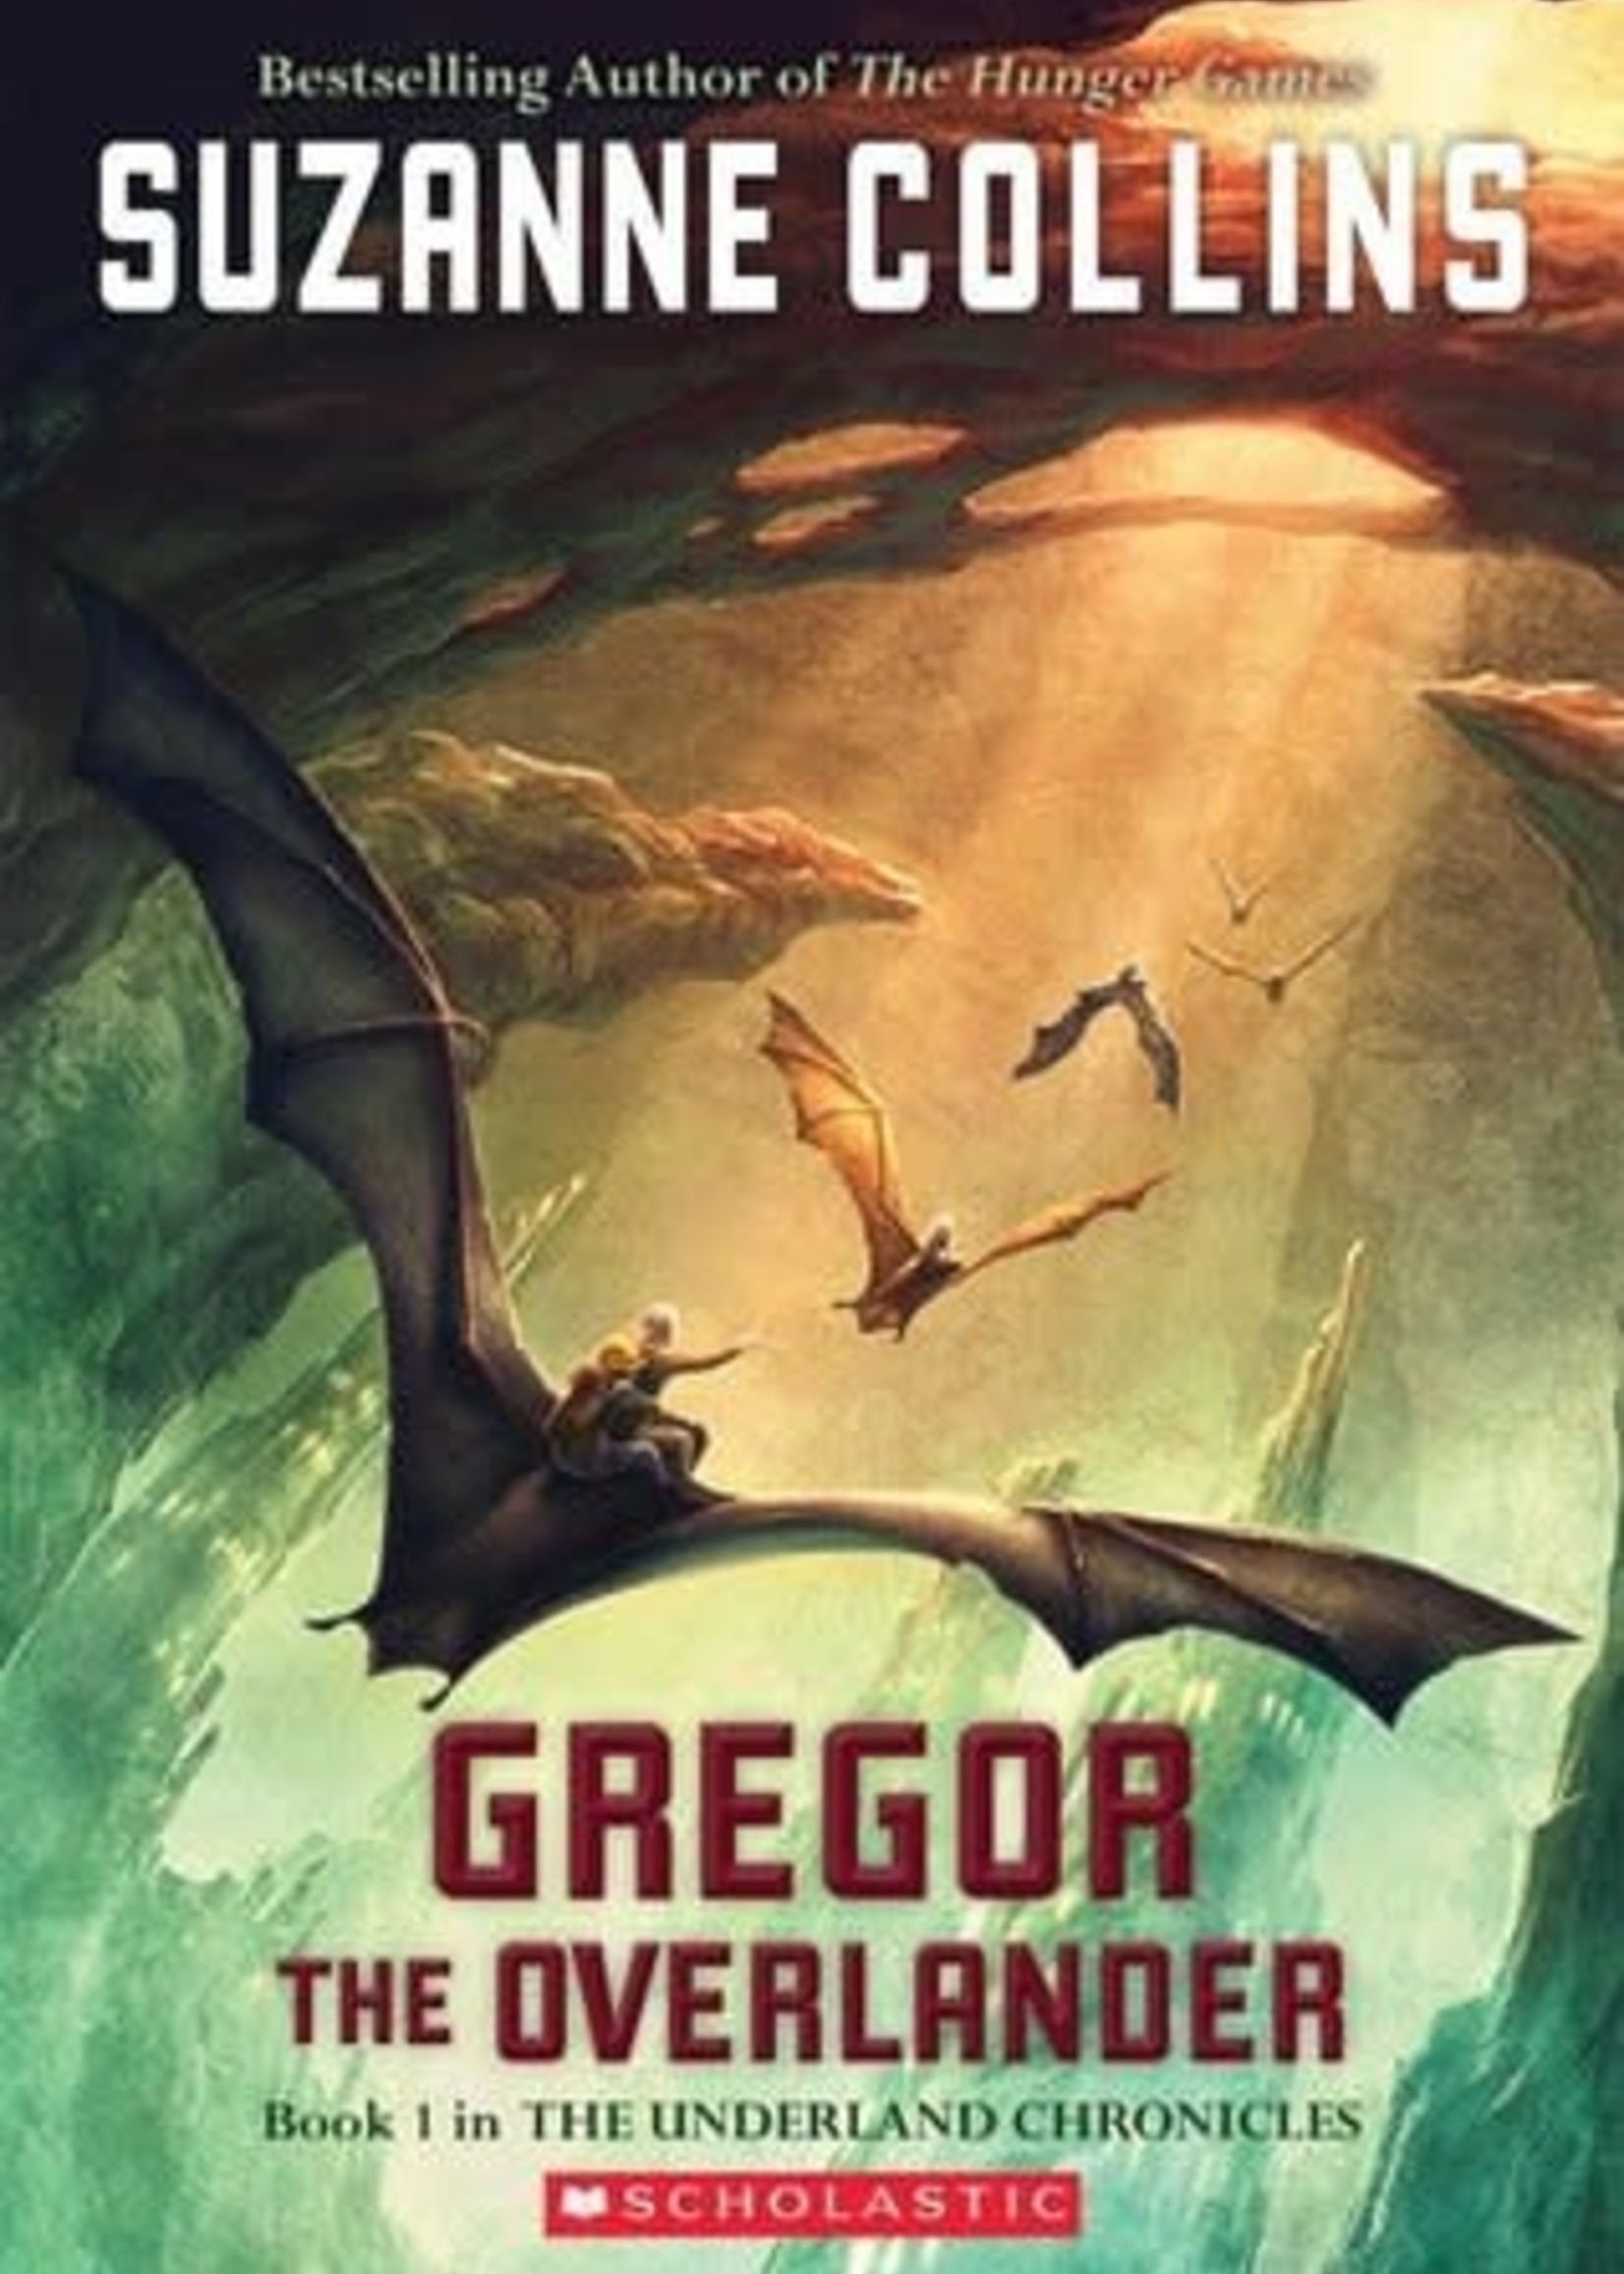 Gregor the Overlander (Underland Chronicles #1) by Suzanne Collins